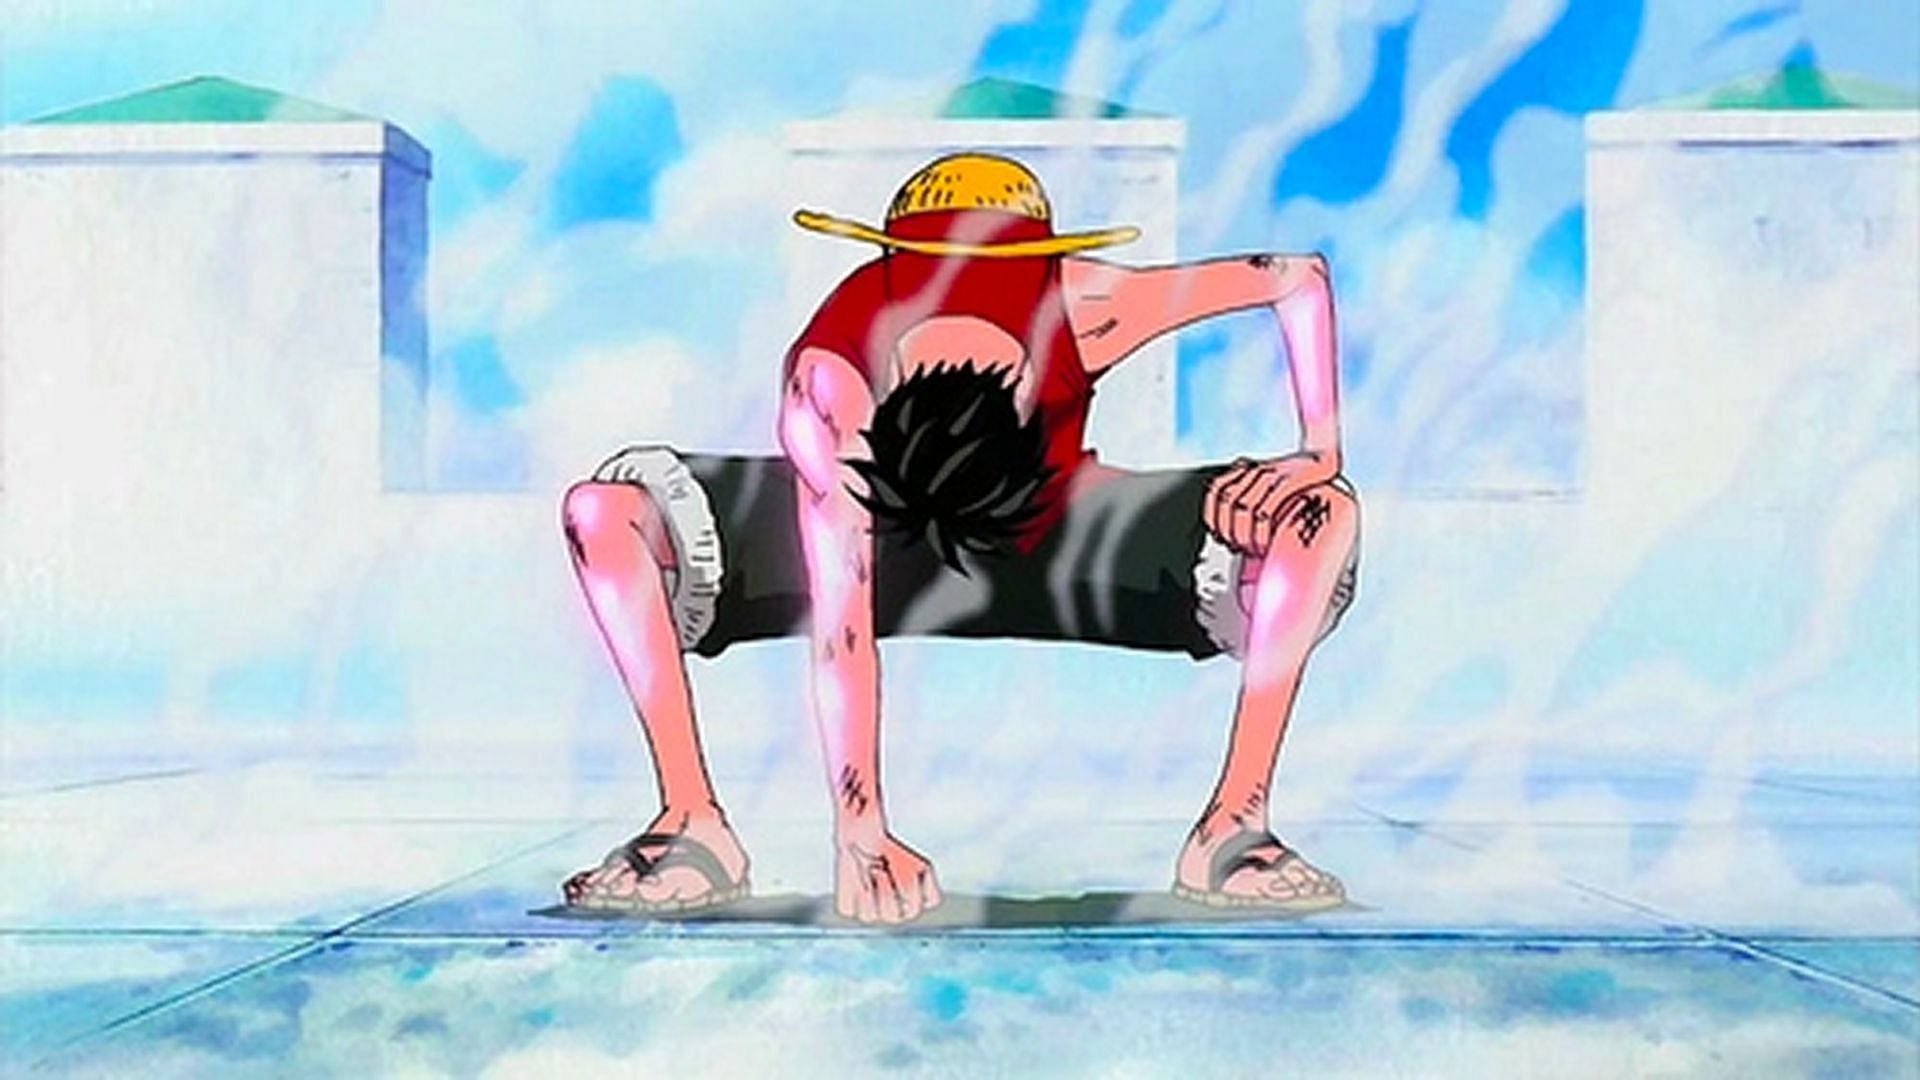 One Piece Anime Teases More Luffy and Gear 5 With Special Images - Anime  Corner